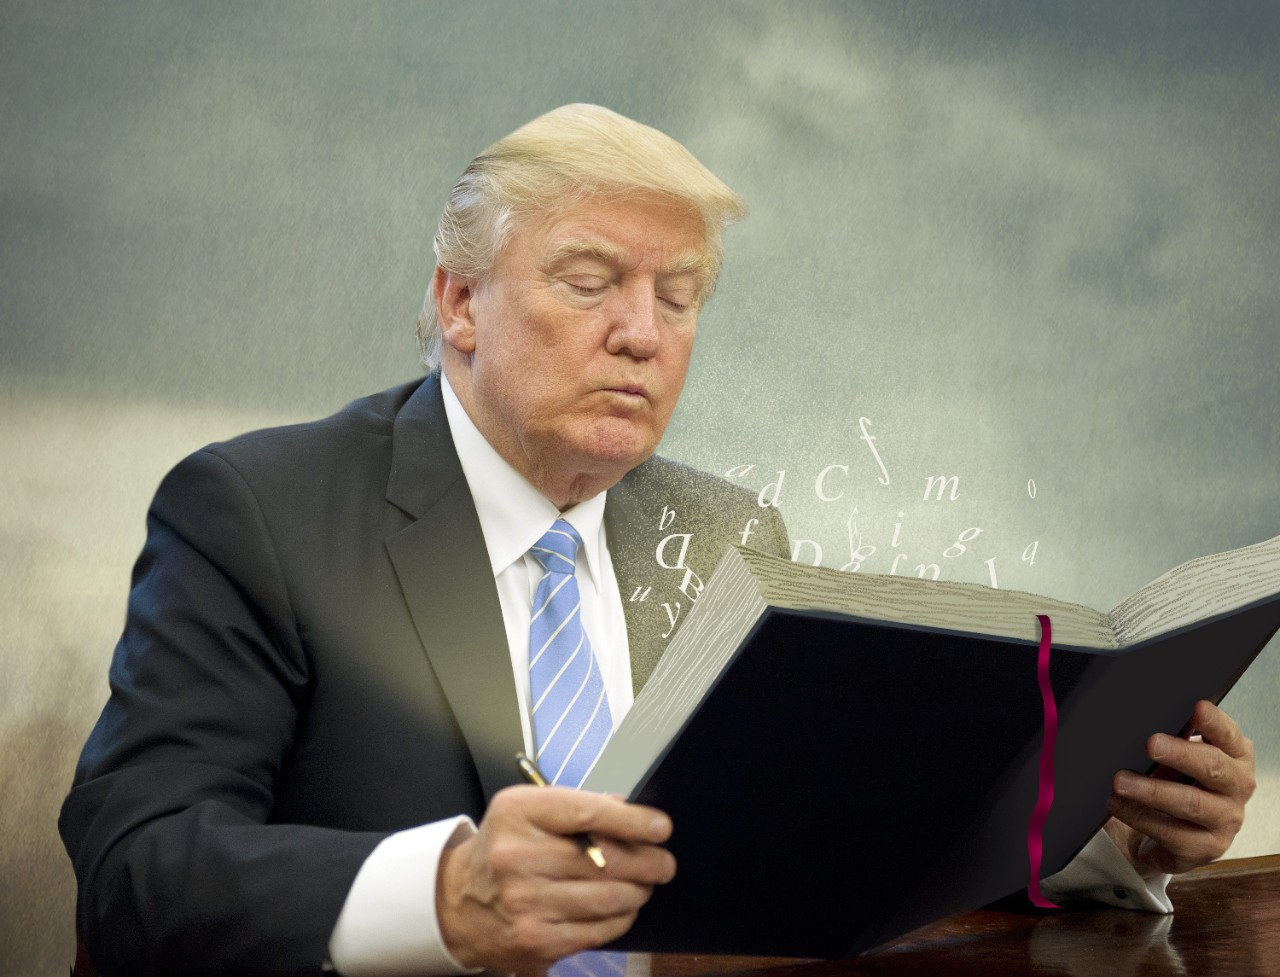 Donald Trump tries to read a book.1280 x 977